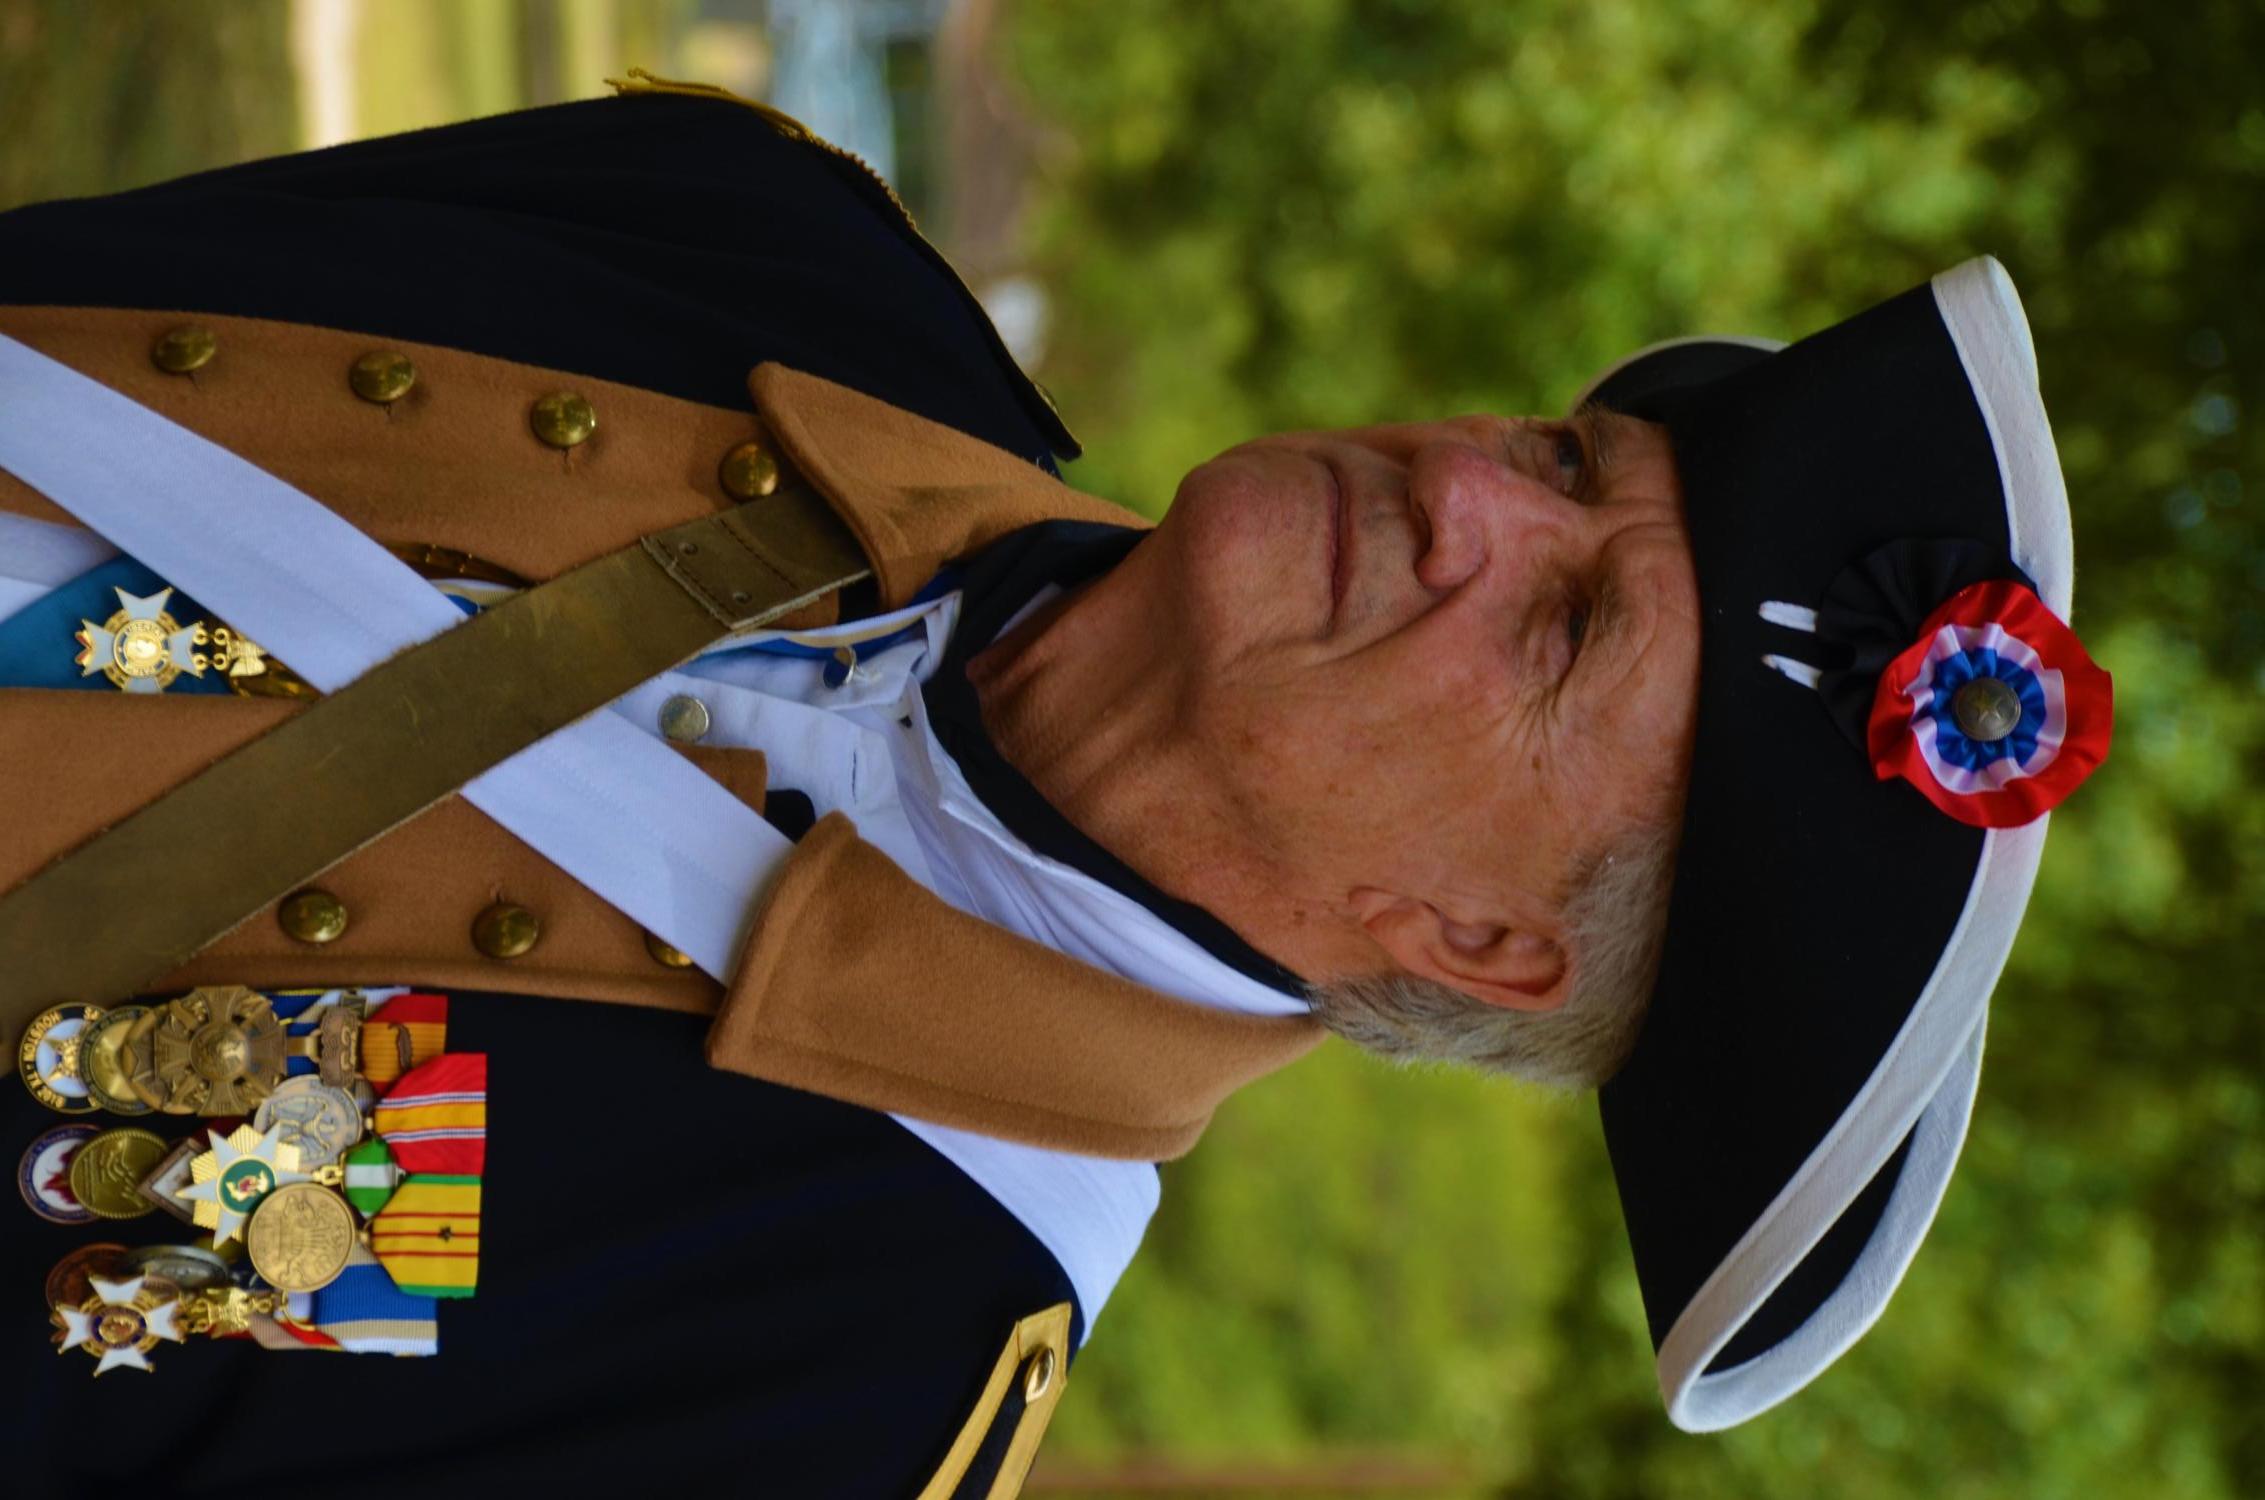 [Compatriot in uniform with several medals at Jester Park]
                                                
                                                    [Sequence #]: 1 of 1
                                                